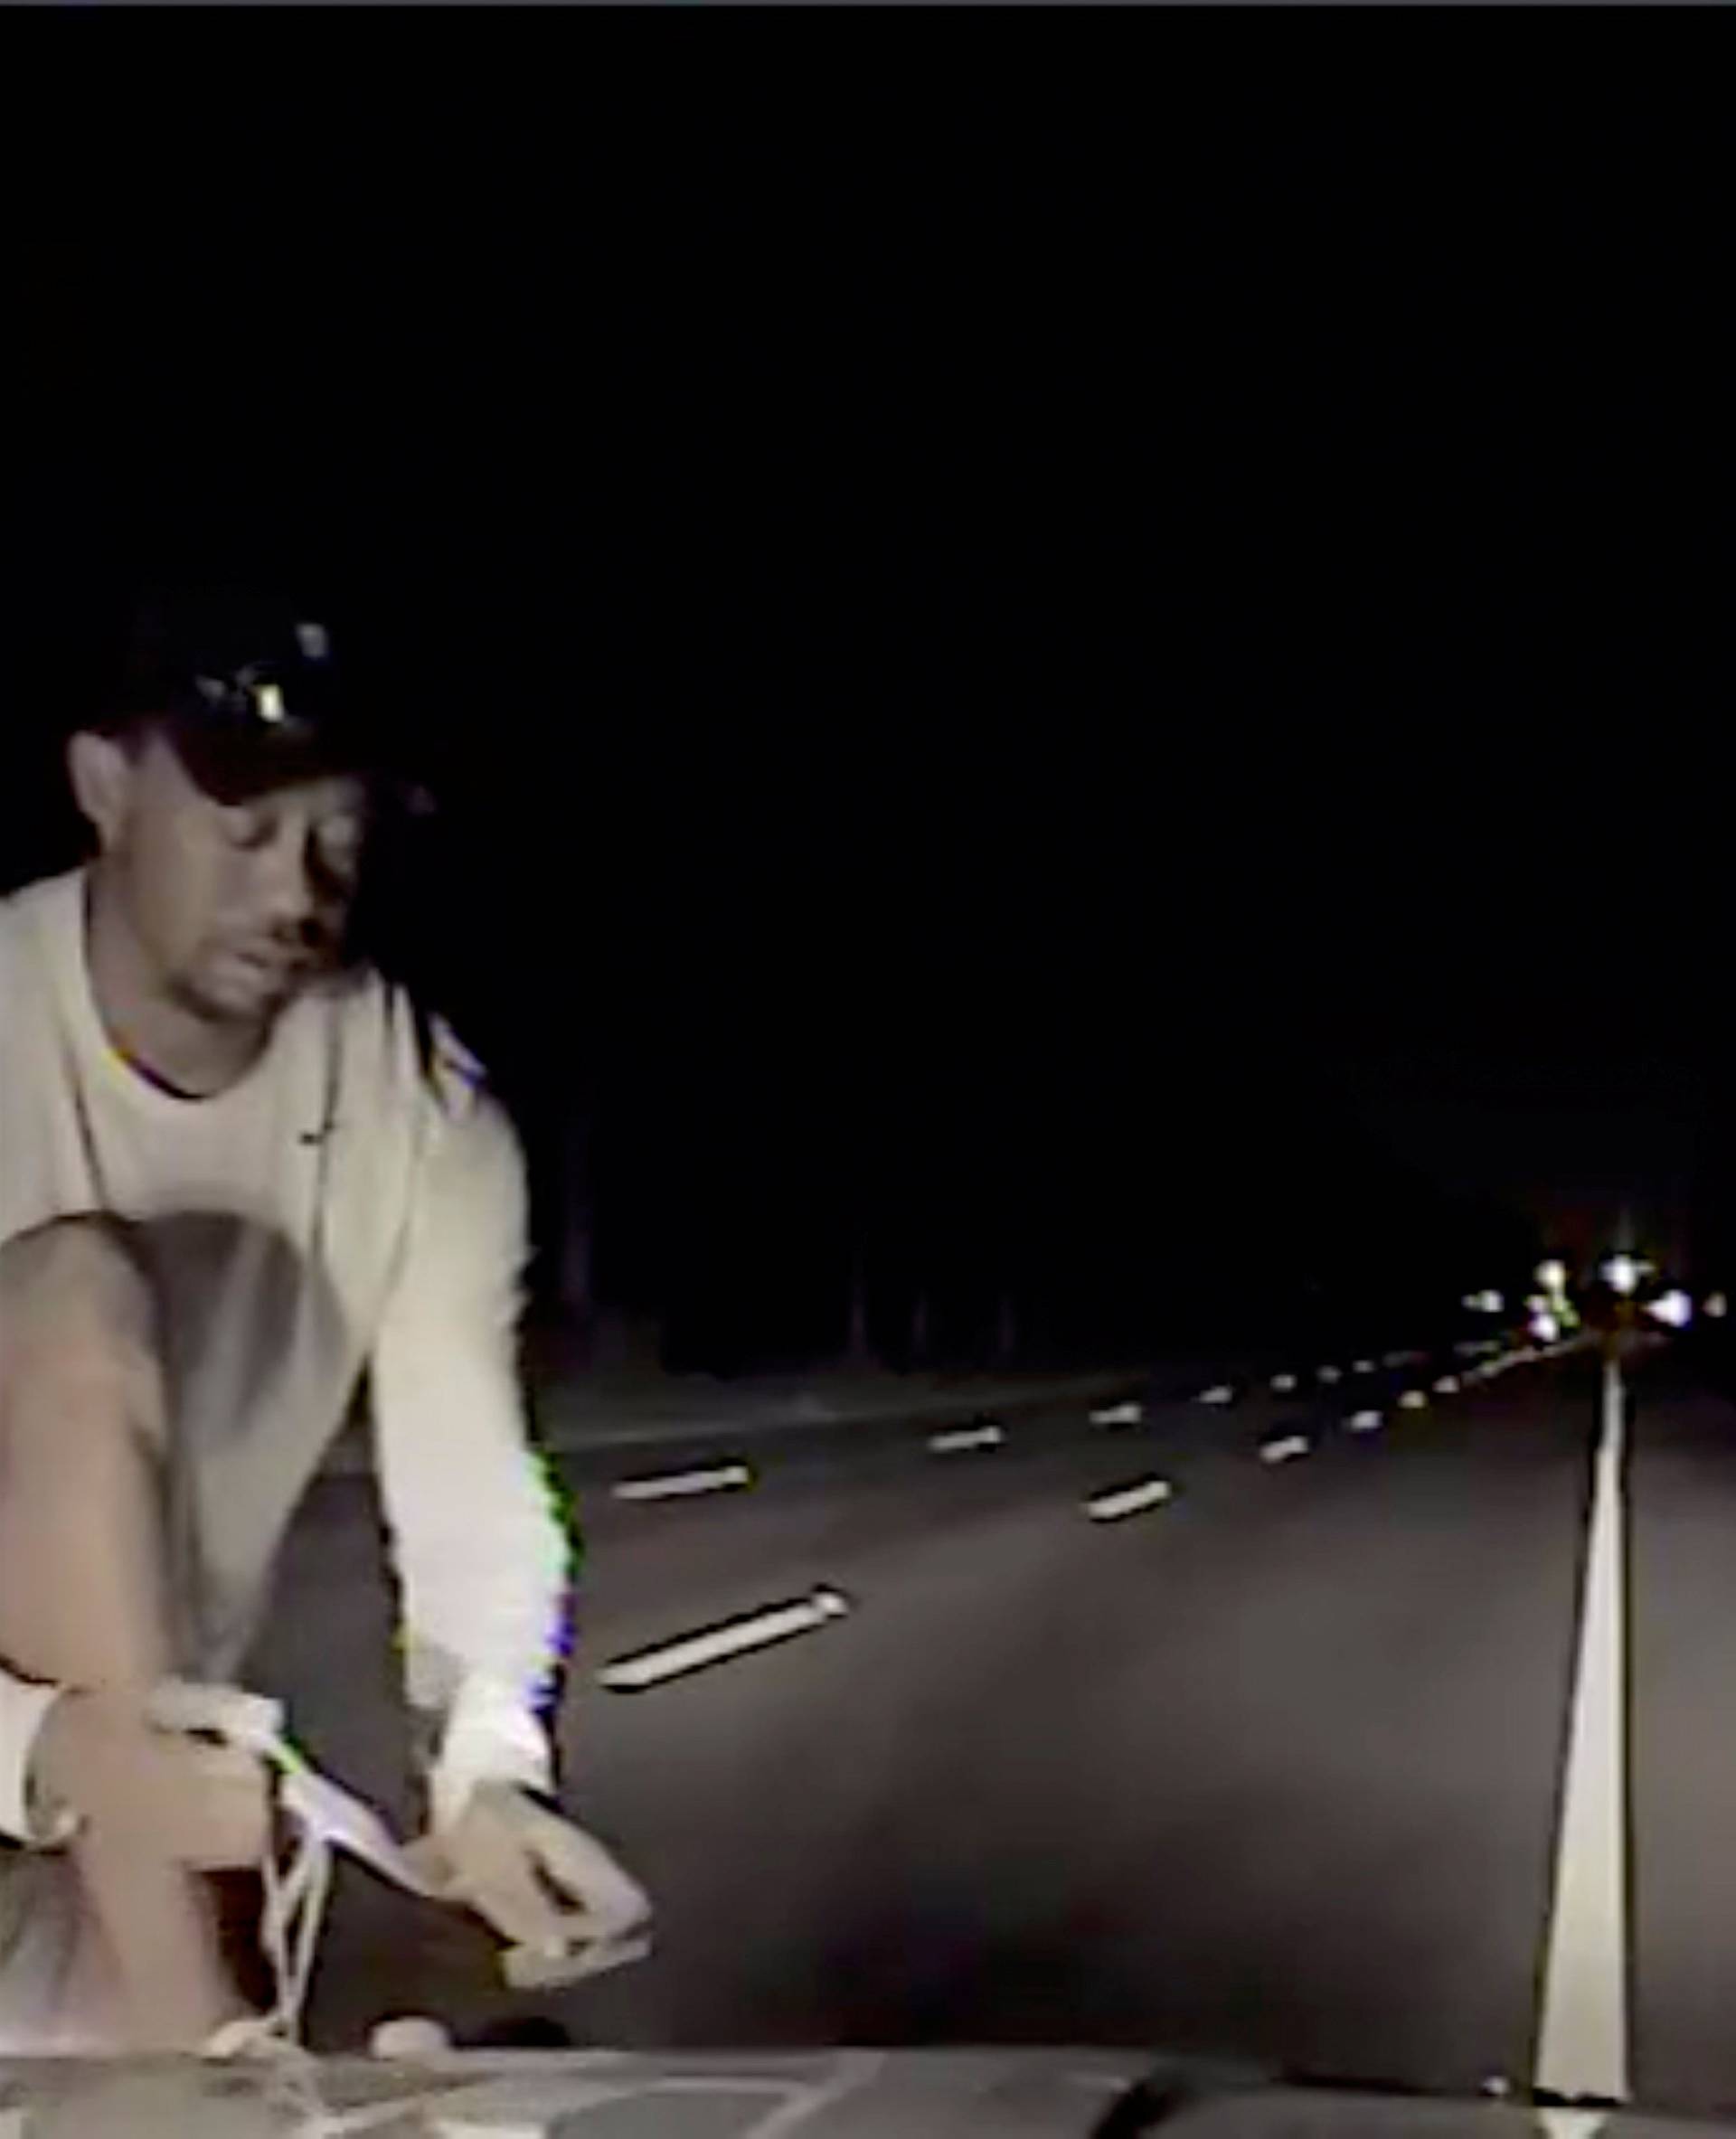 Tiger Woods is seen attempting to tie shoe laces before performing field sobriety tests in this still image from police dashcam video in Jupiter